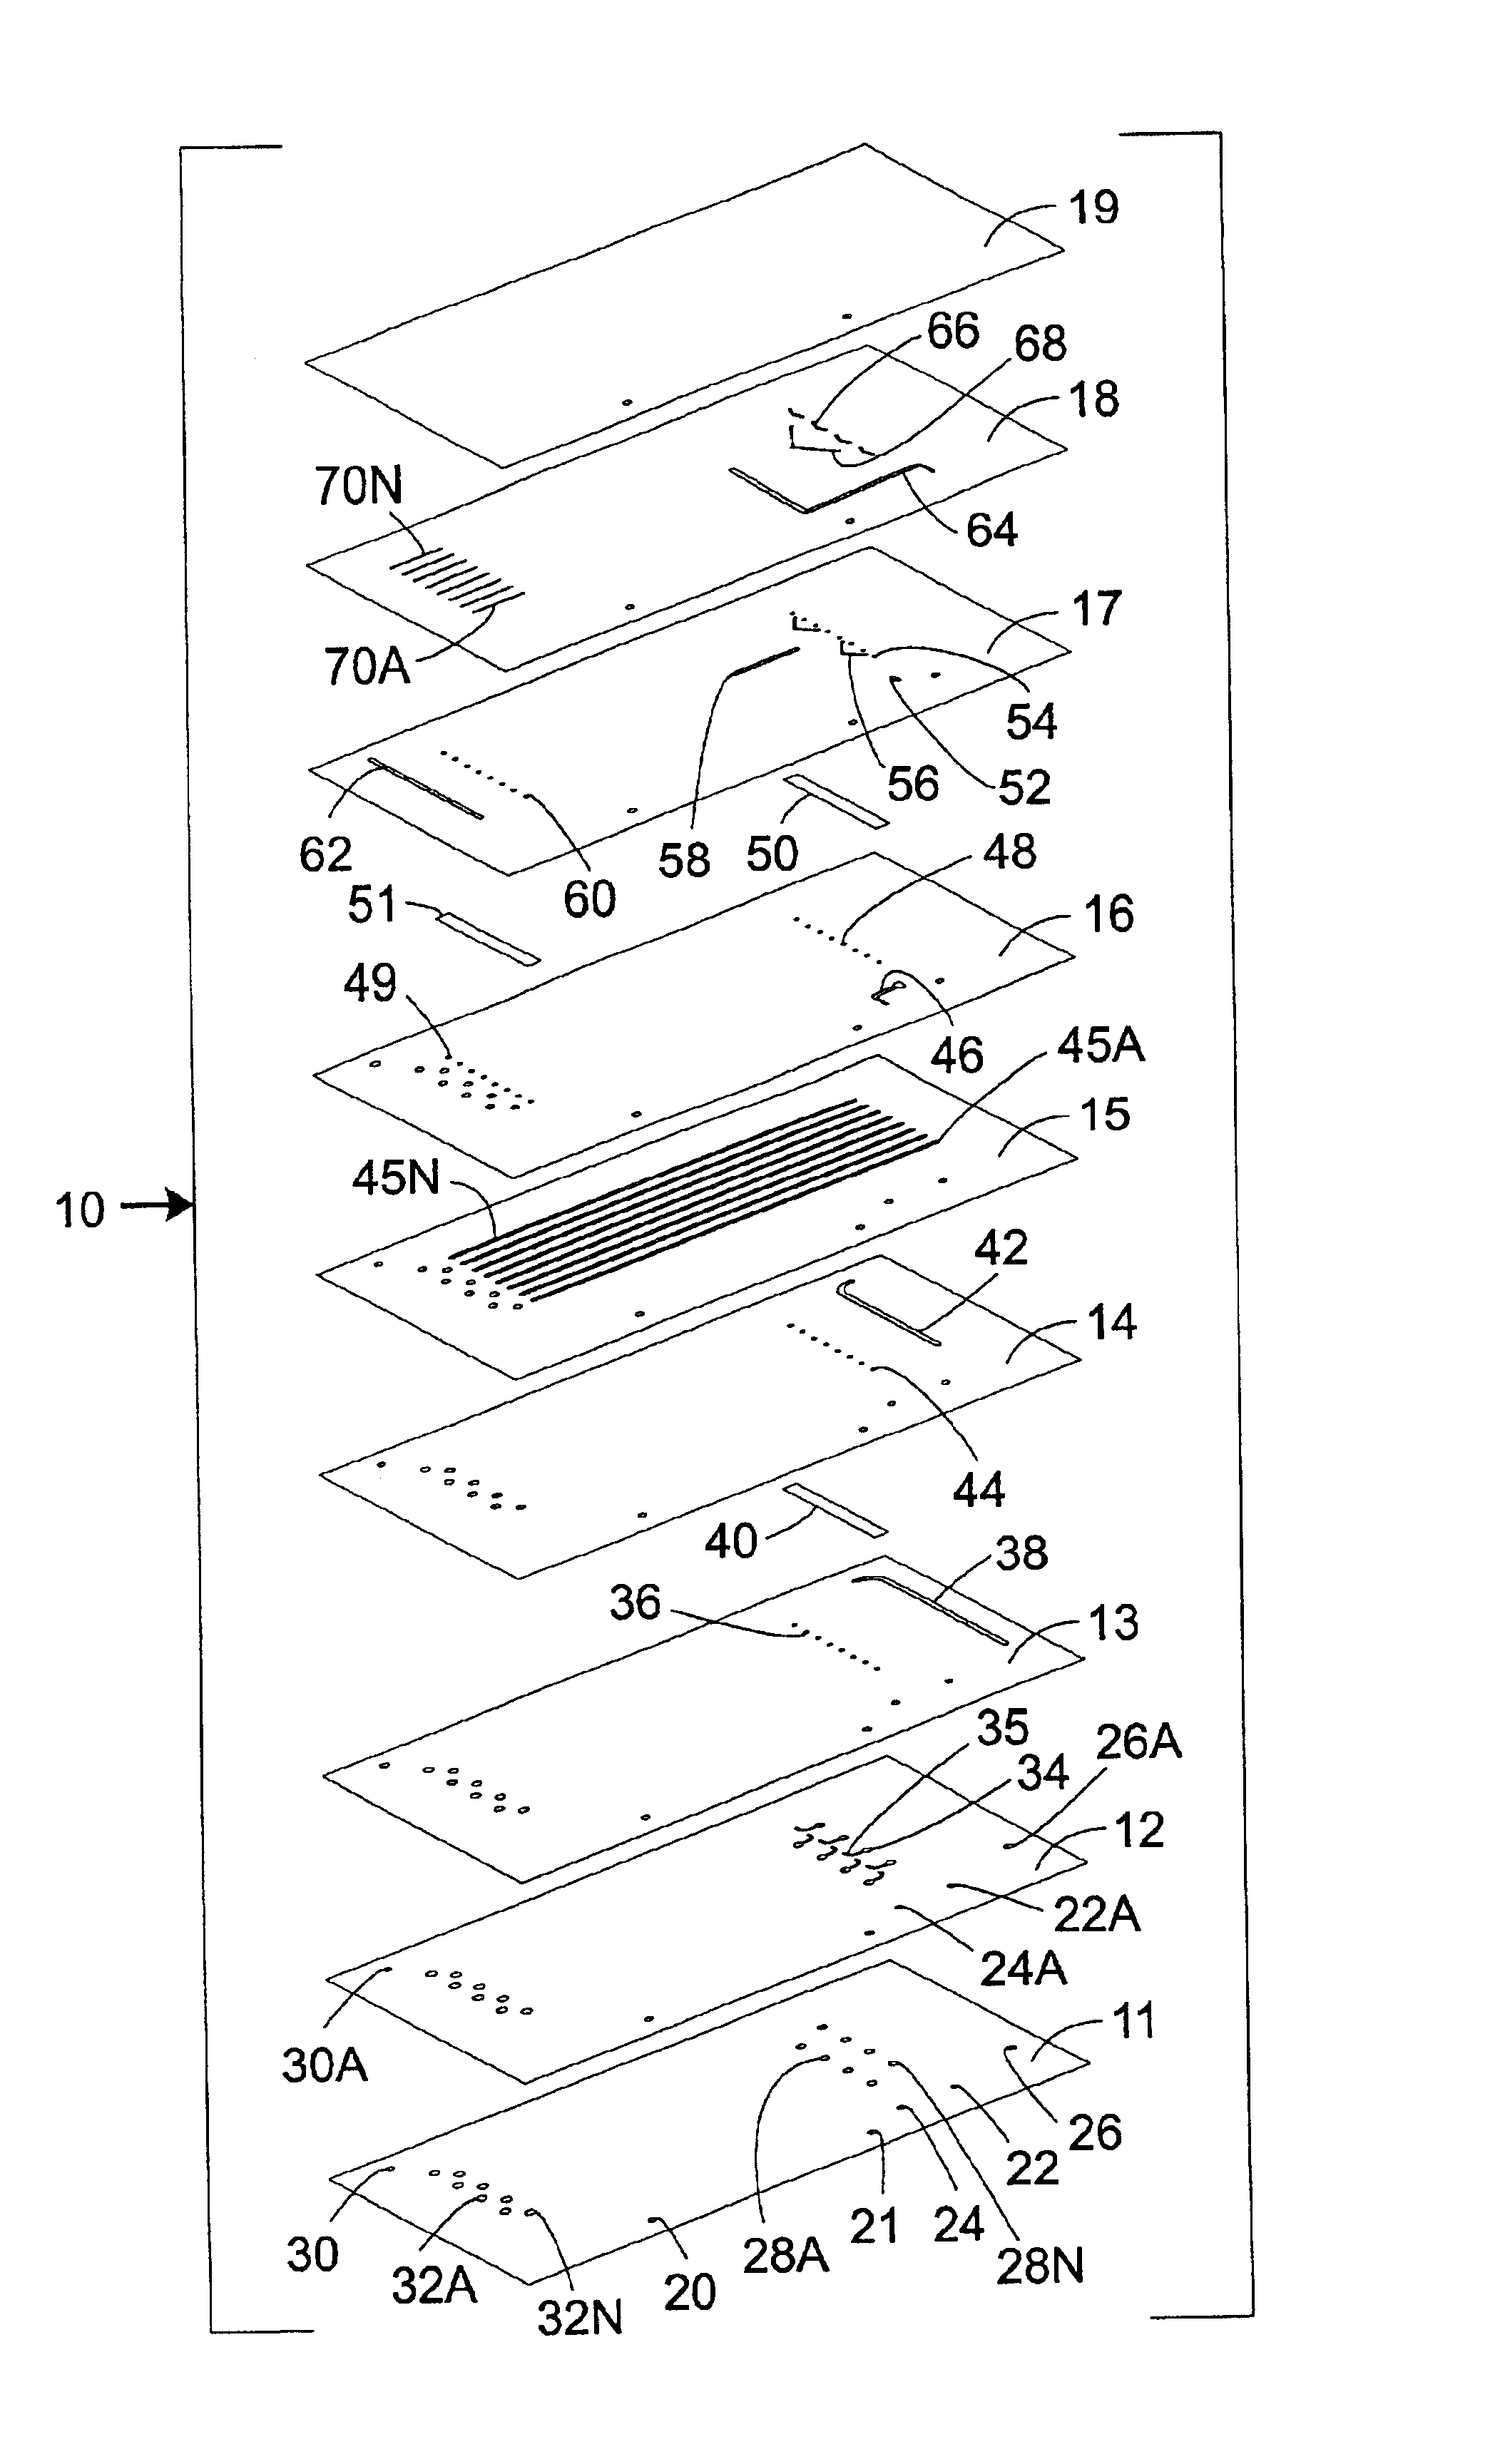 Microfluidic devices with distributing inputs